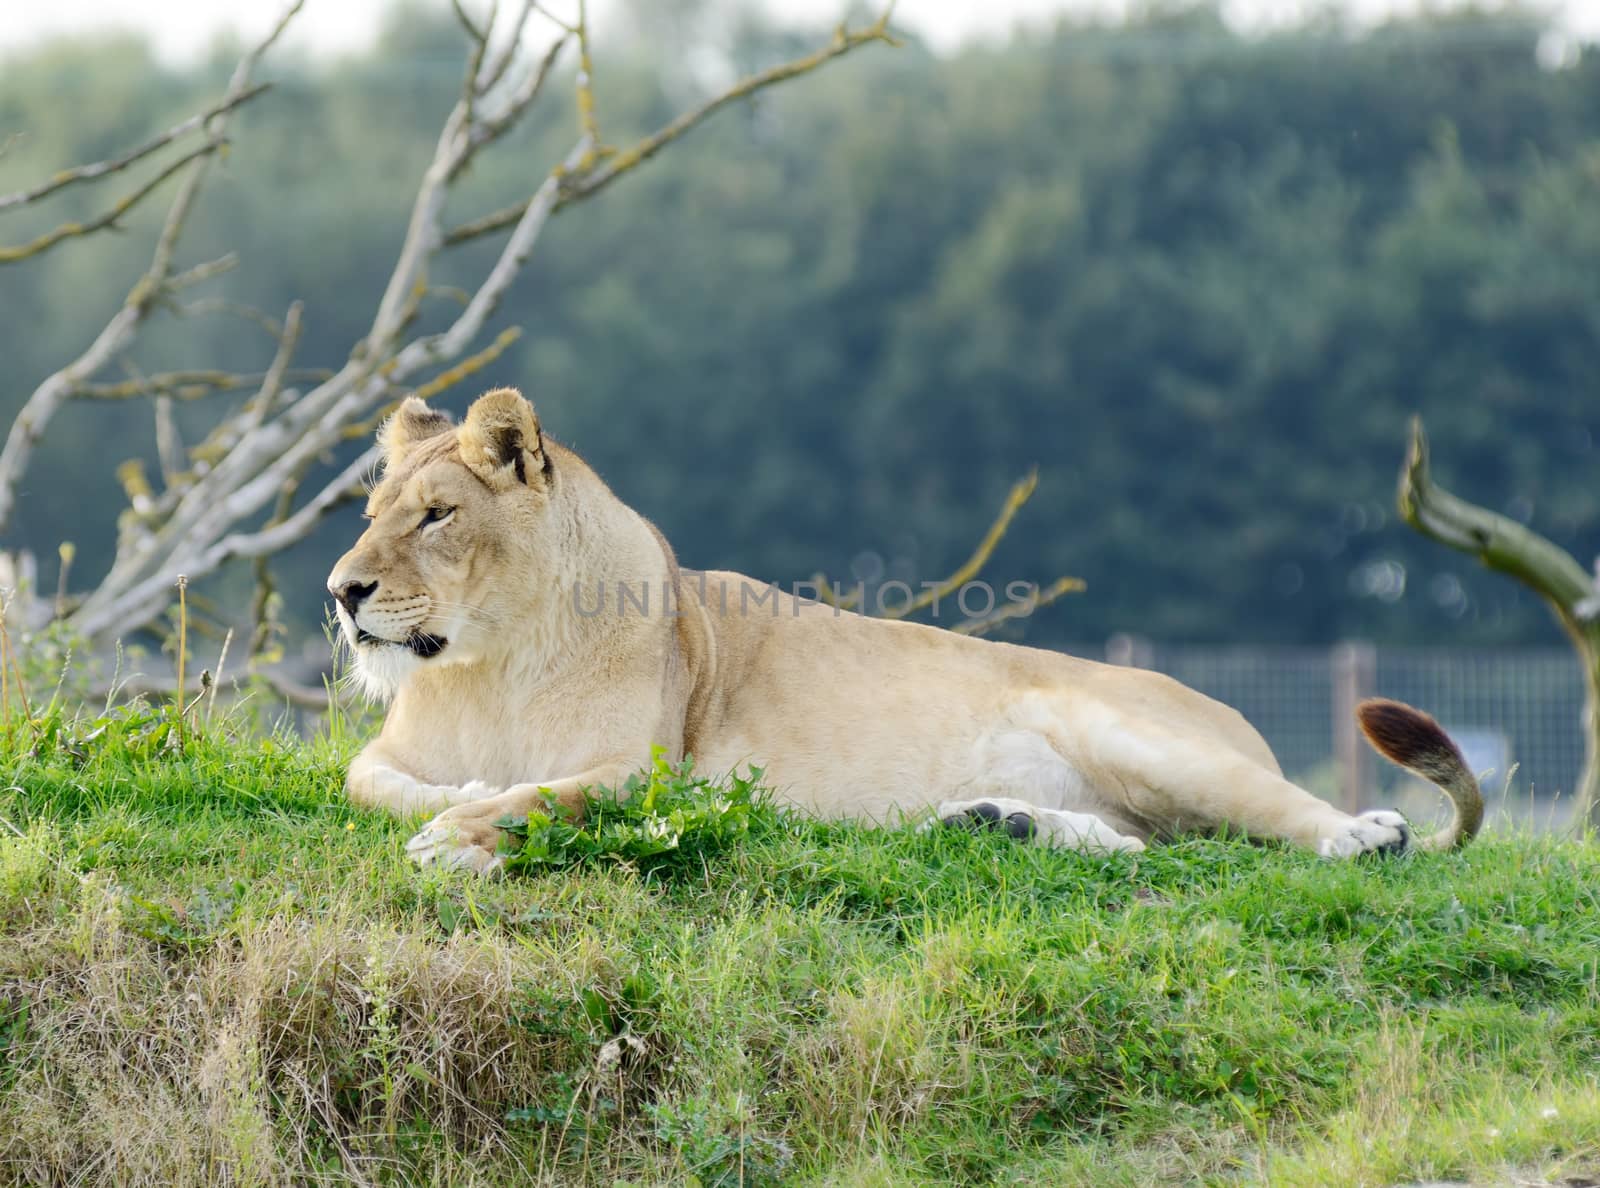 Lioness laying on grass looking alert